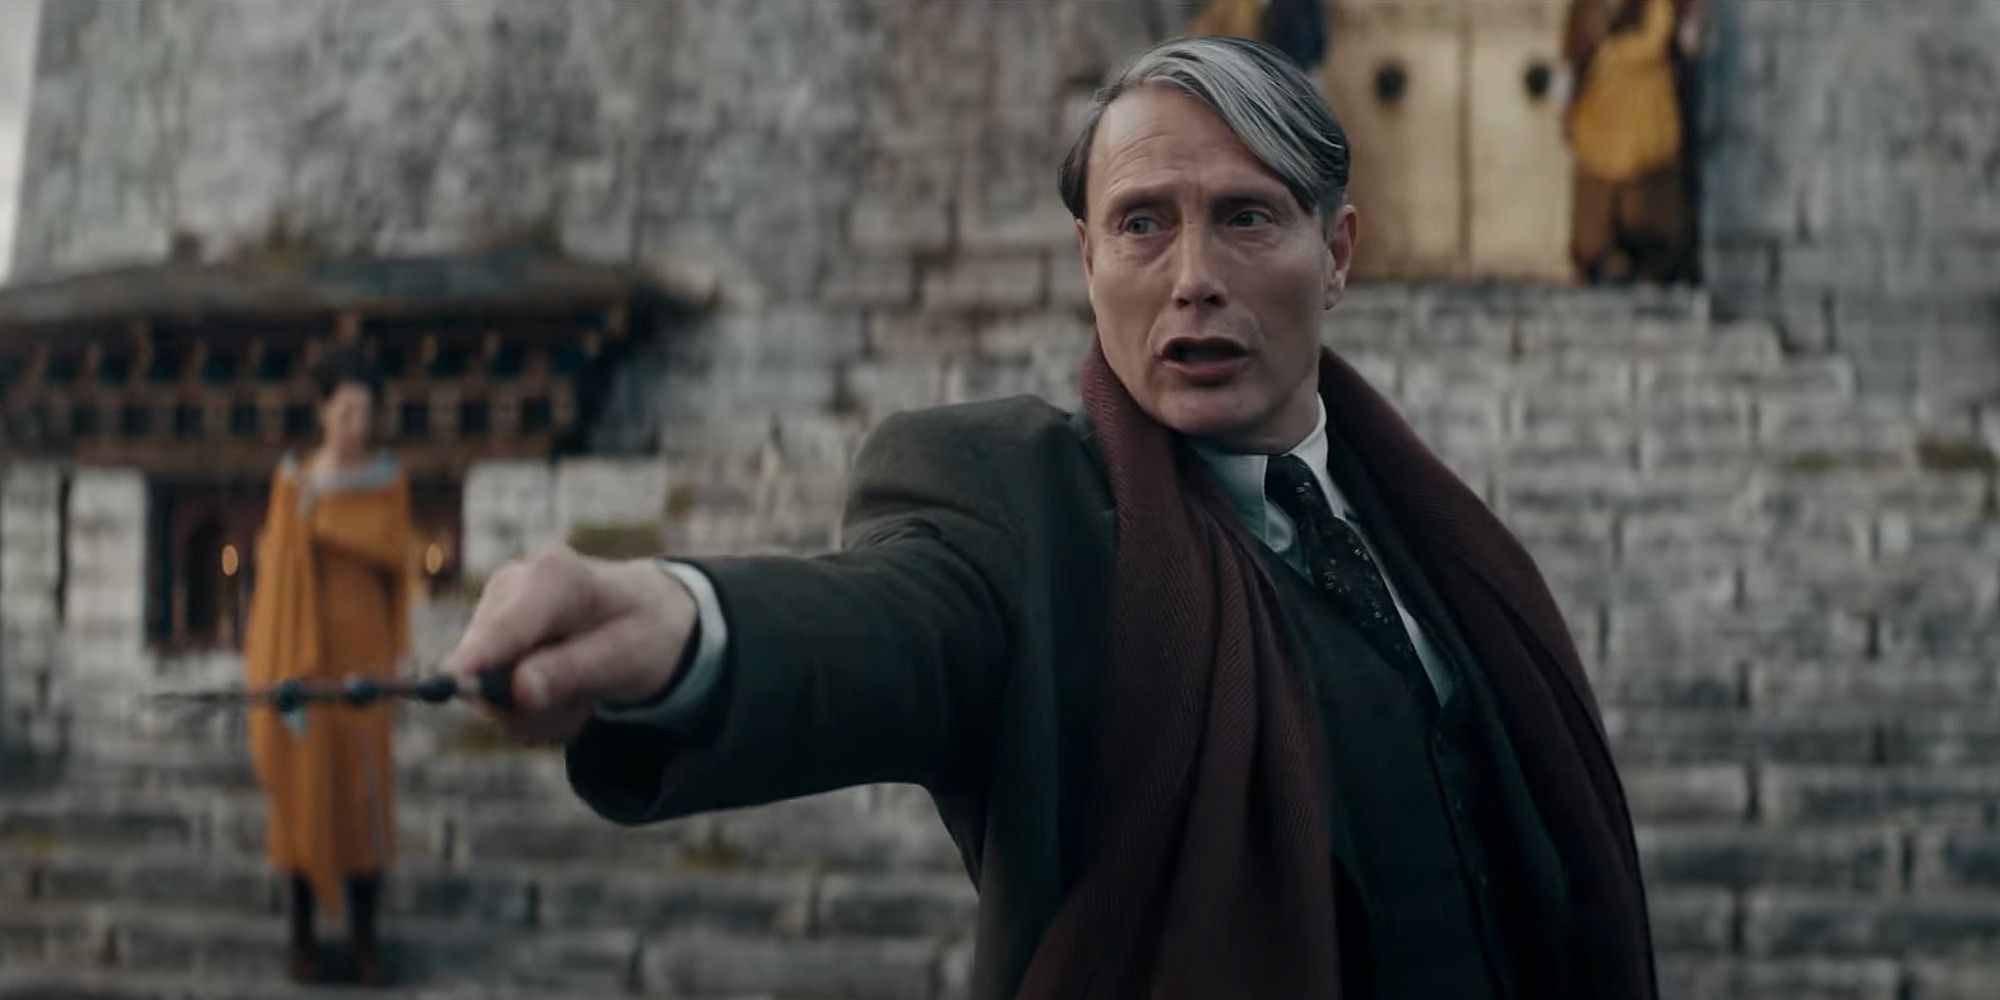 Grindlewald pointing his want at someone in Fantastic Beasts 3 trailer